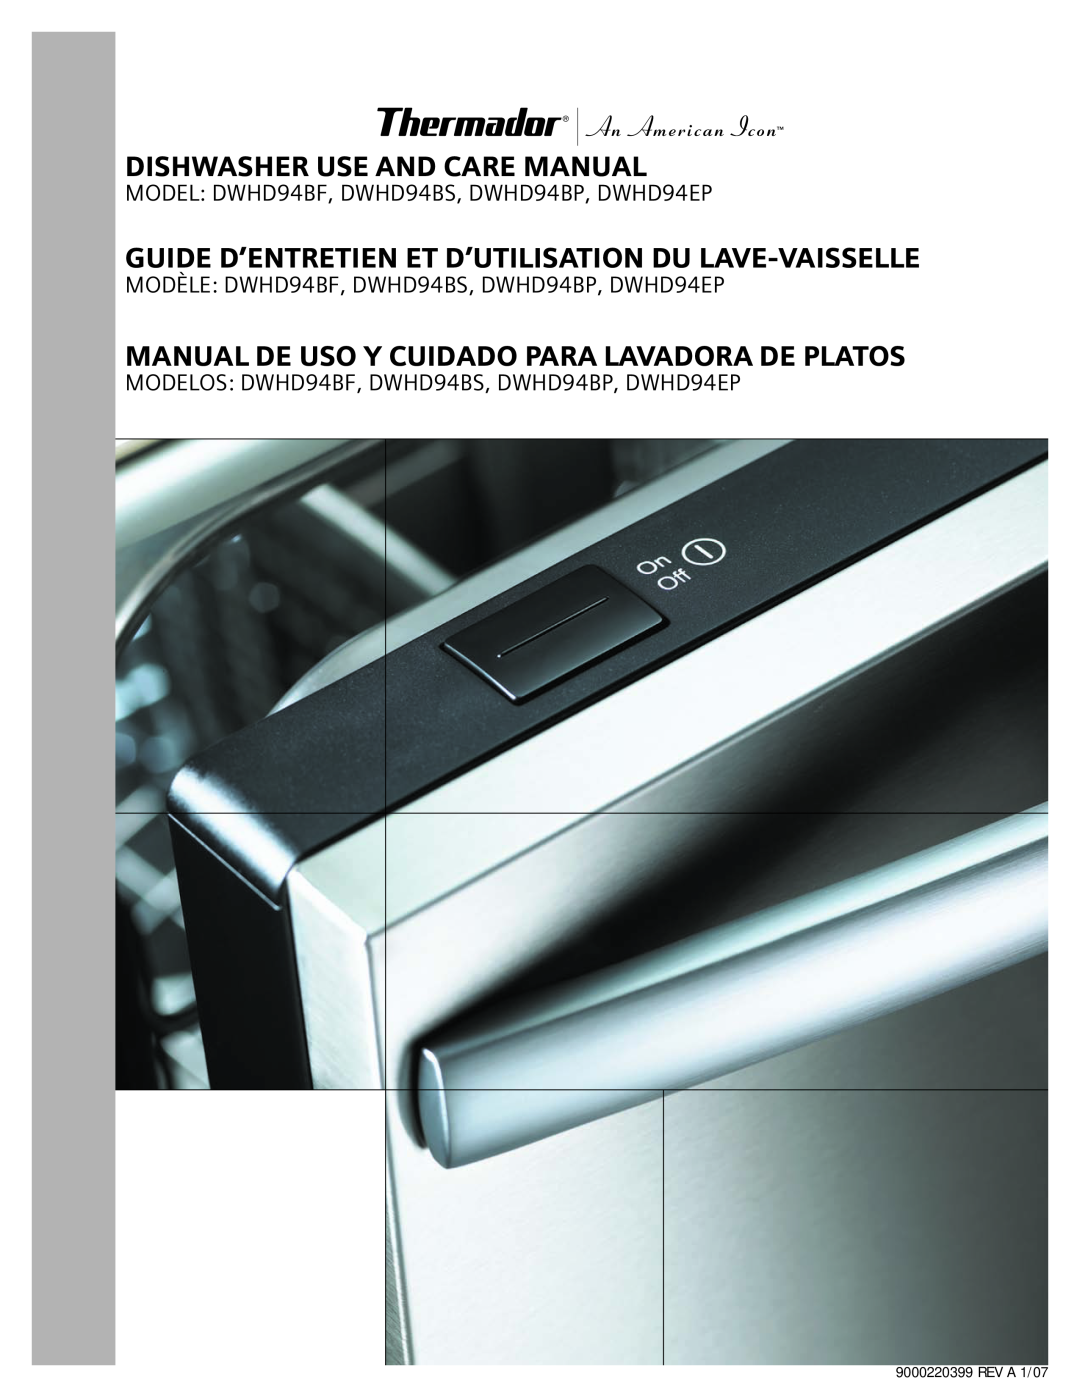 Thermador DWHD94EP, DWHD94BS, DWHD94BP manual Dishwasher Use And Care Manual, MODEL DWHD94BF, DWHD94BS, DWHD94BP, DWHD94EP 